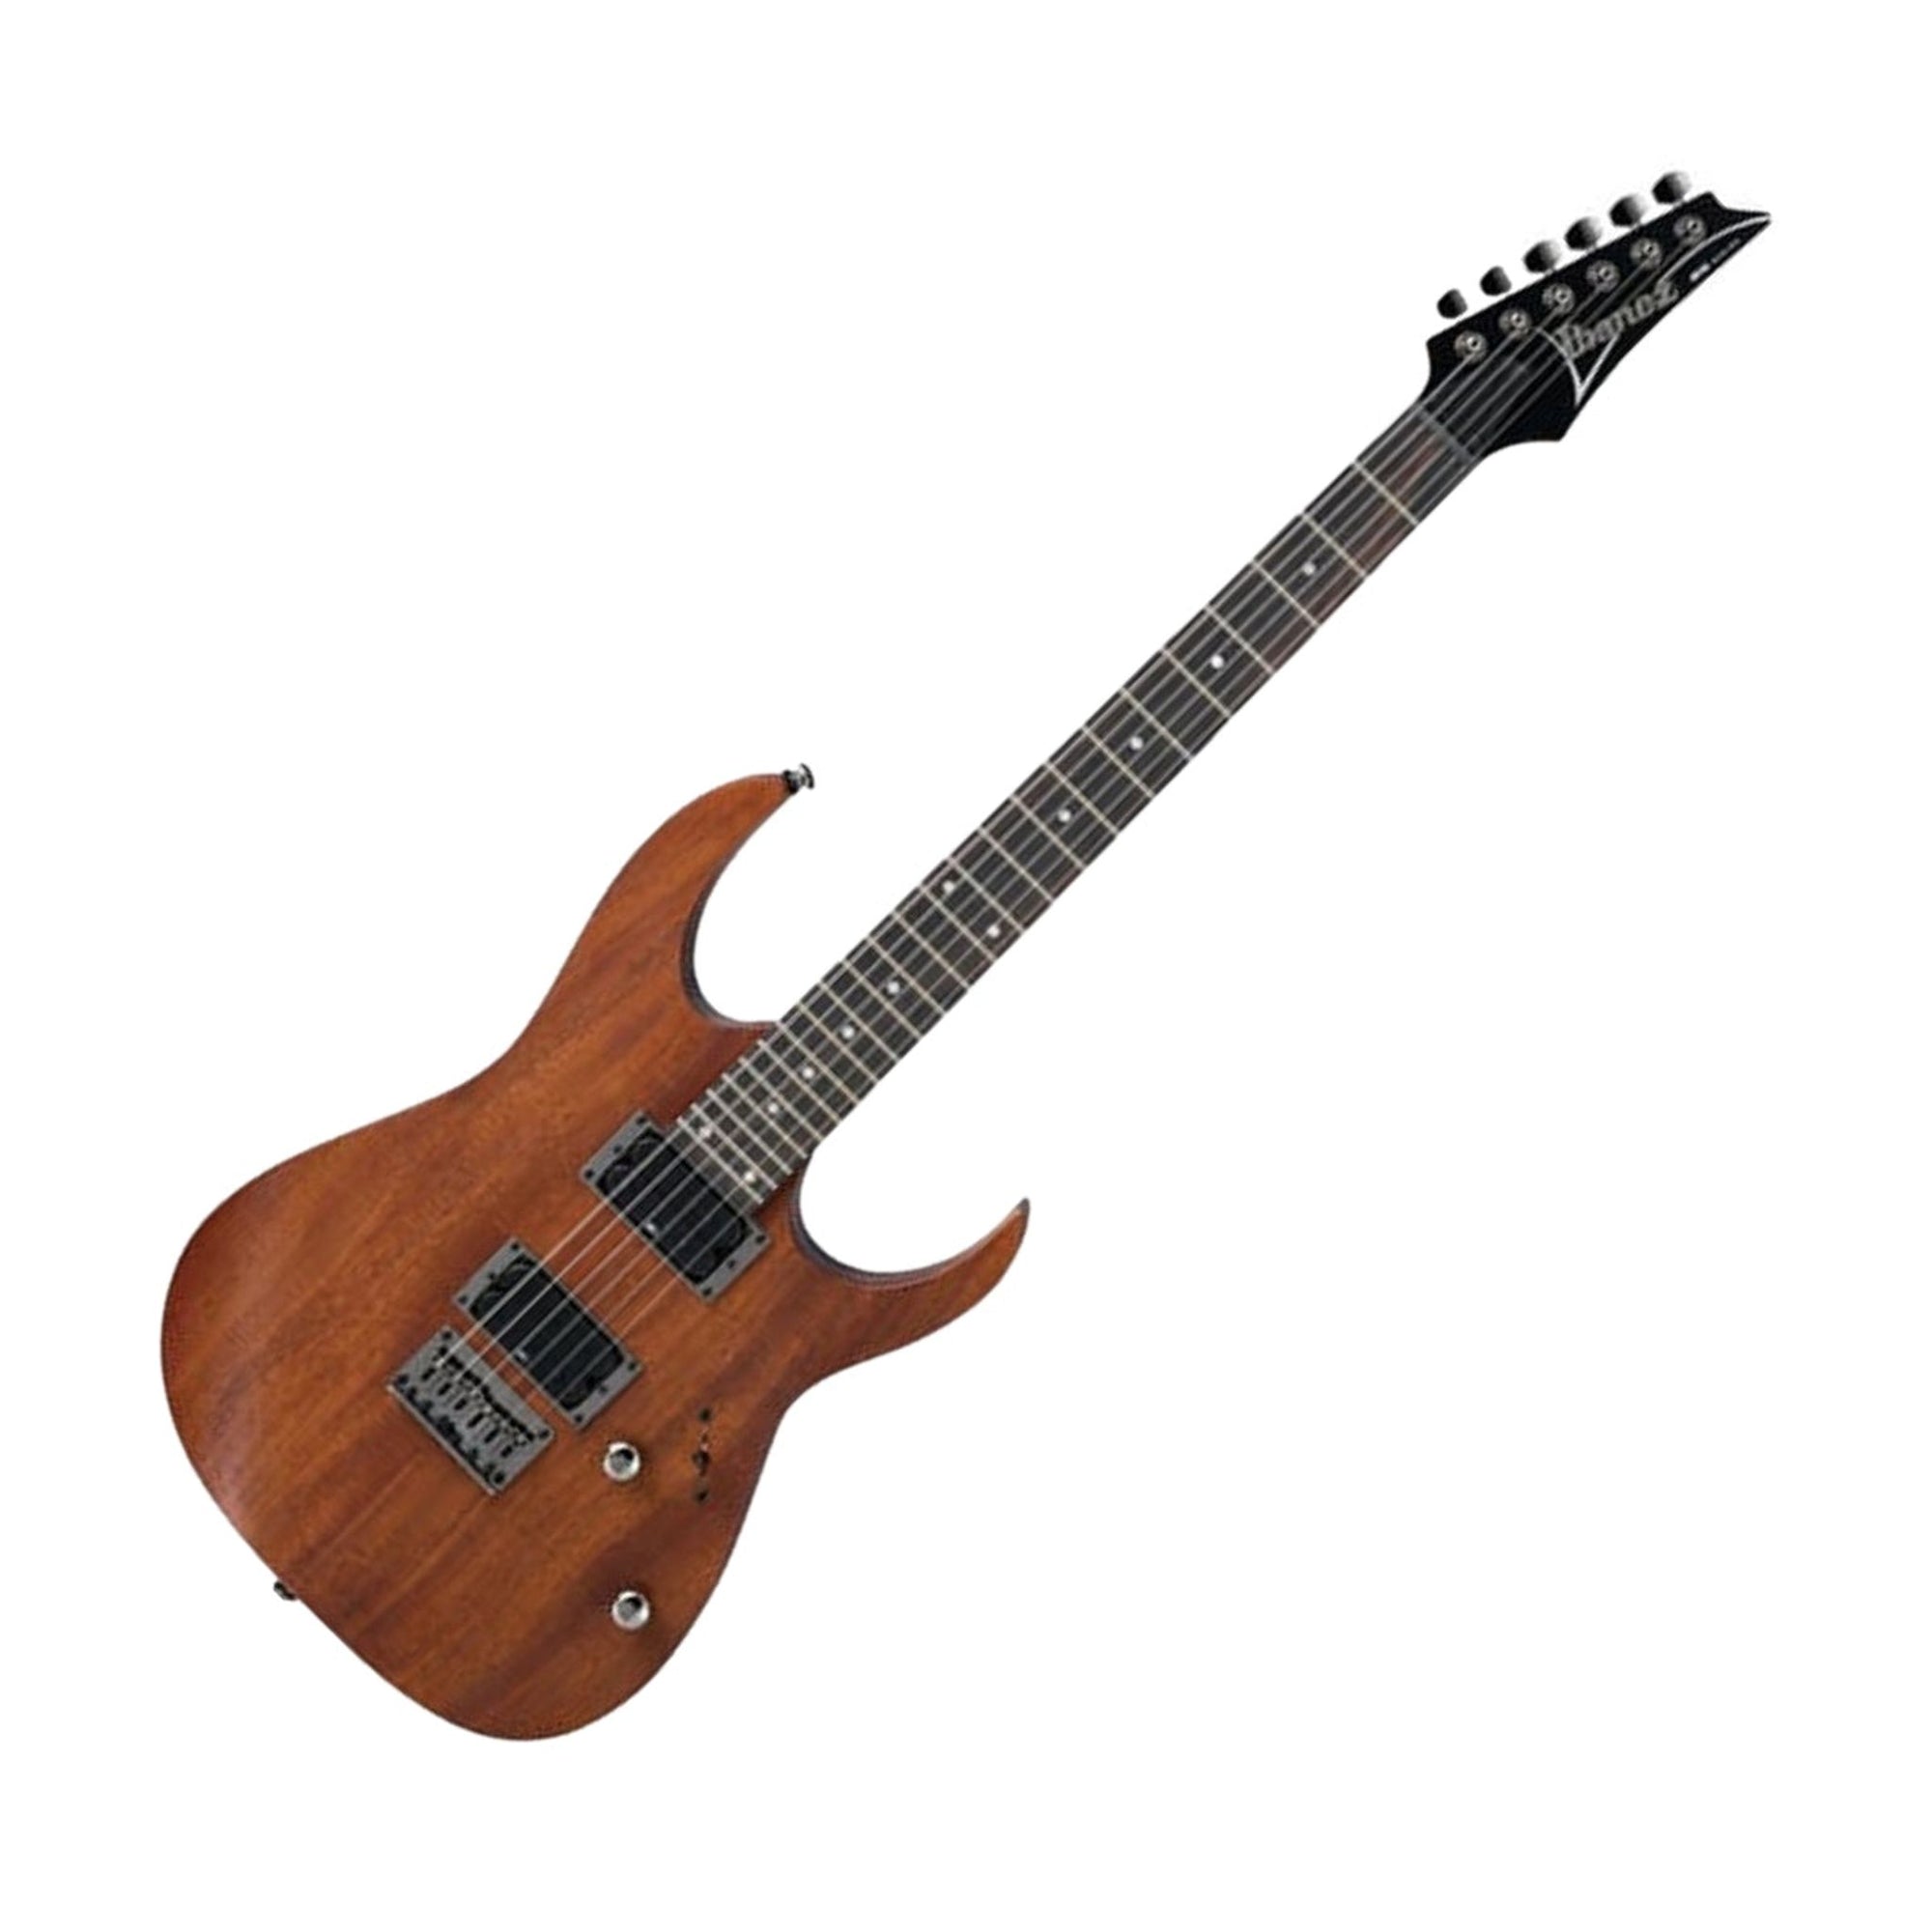 The Ibanez RG421 Electric Guitar is a member of the RG series of guitars which is the most recognizable and distinctive guitar in the Ibanez line.